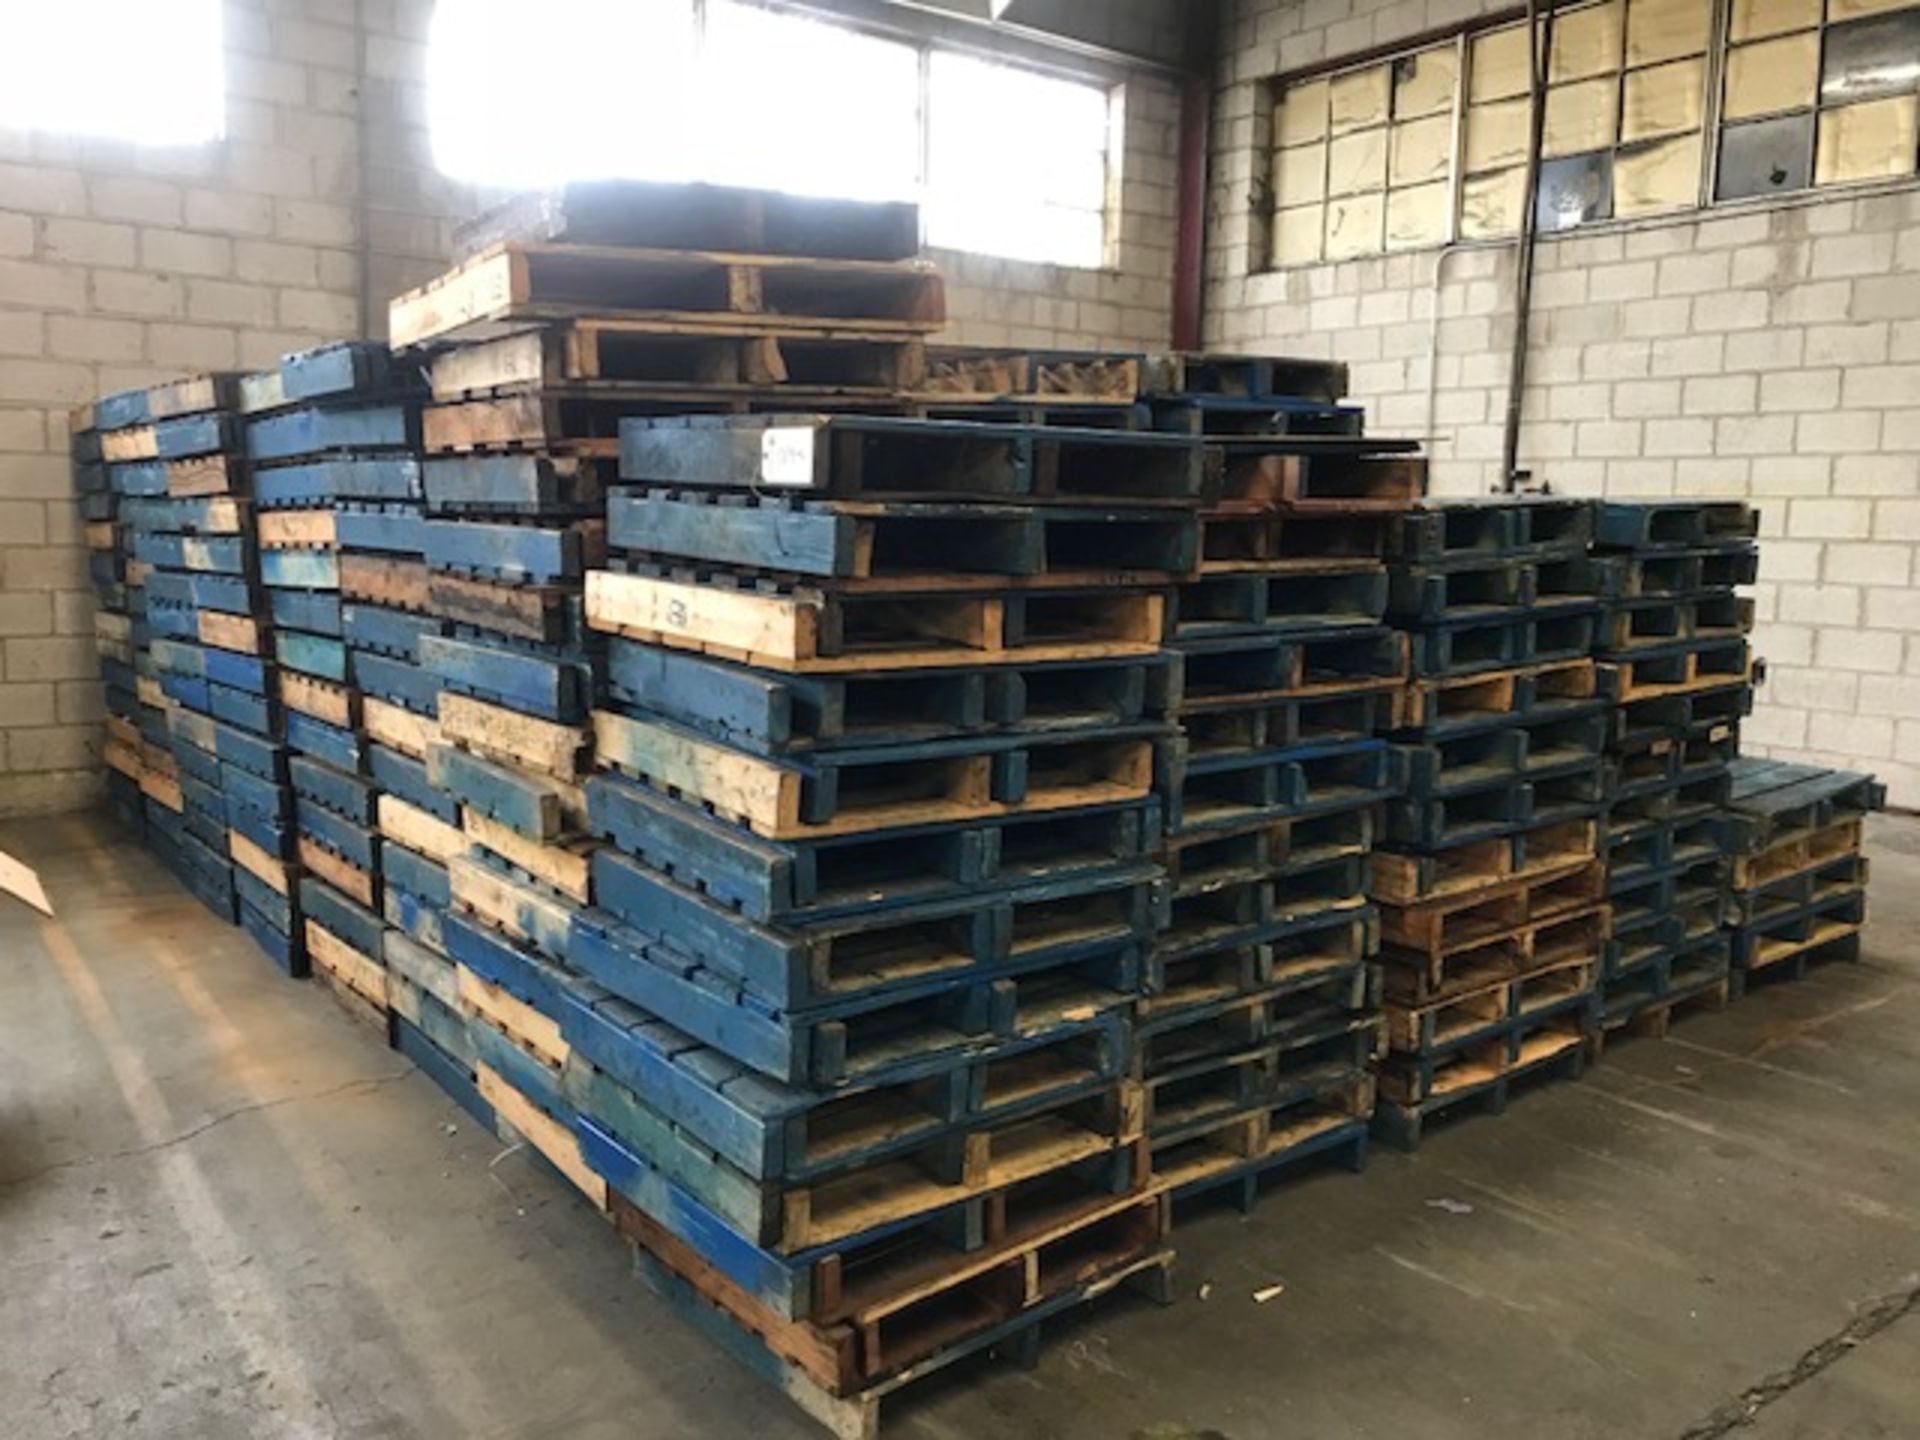 Approx (400) 30" x 30" Pallets